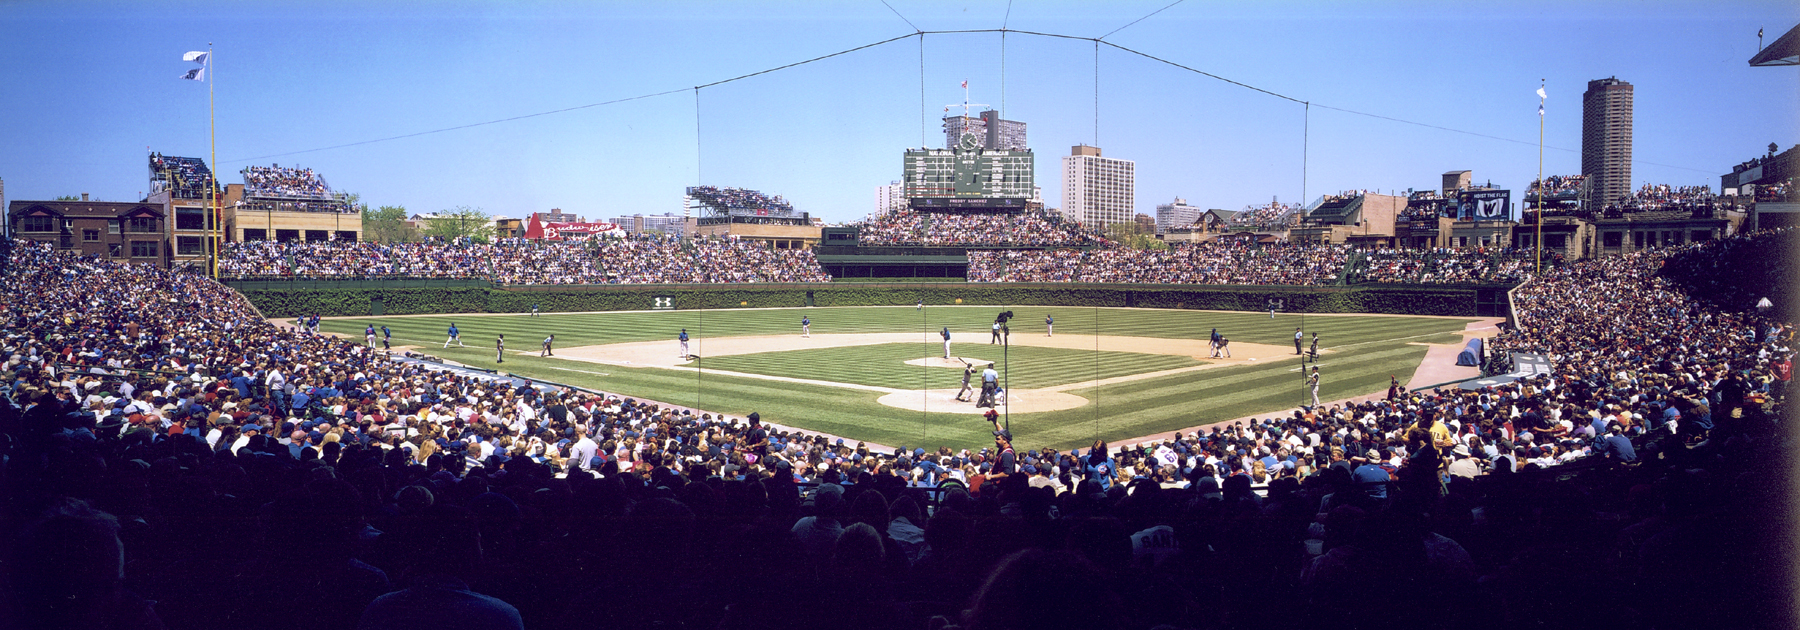 Cubs Background Of Chicago Memorabilia Wrigley Field Panorama